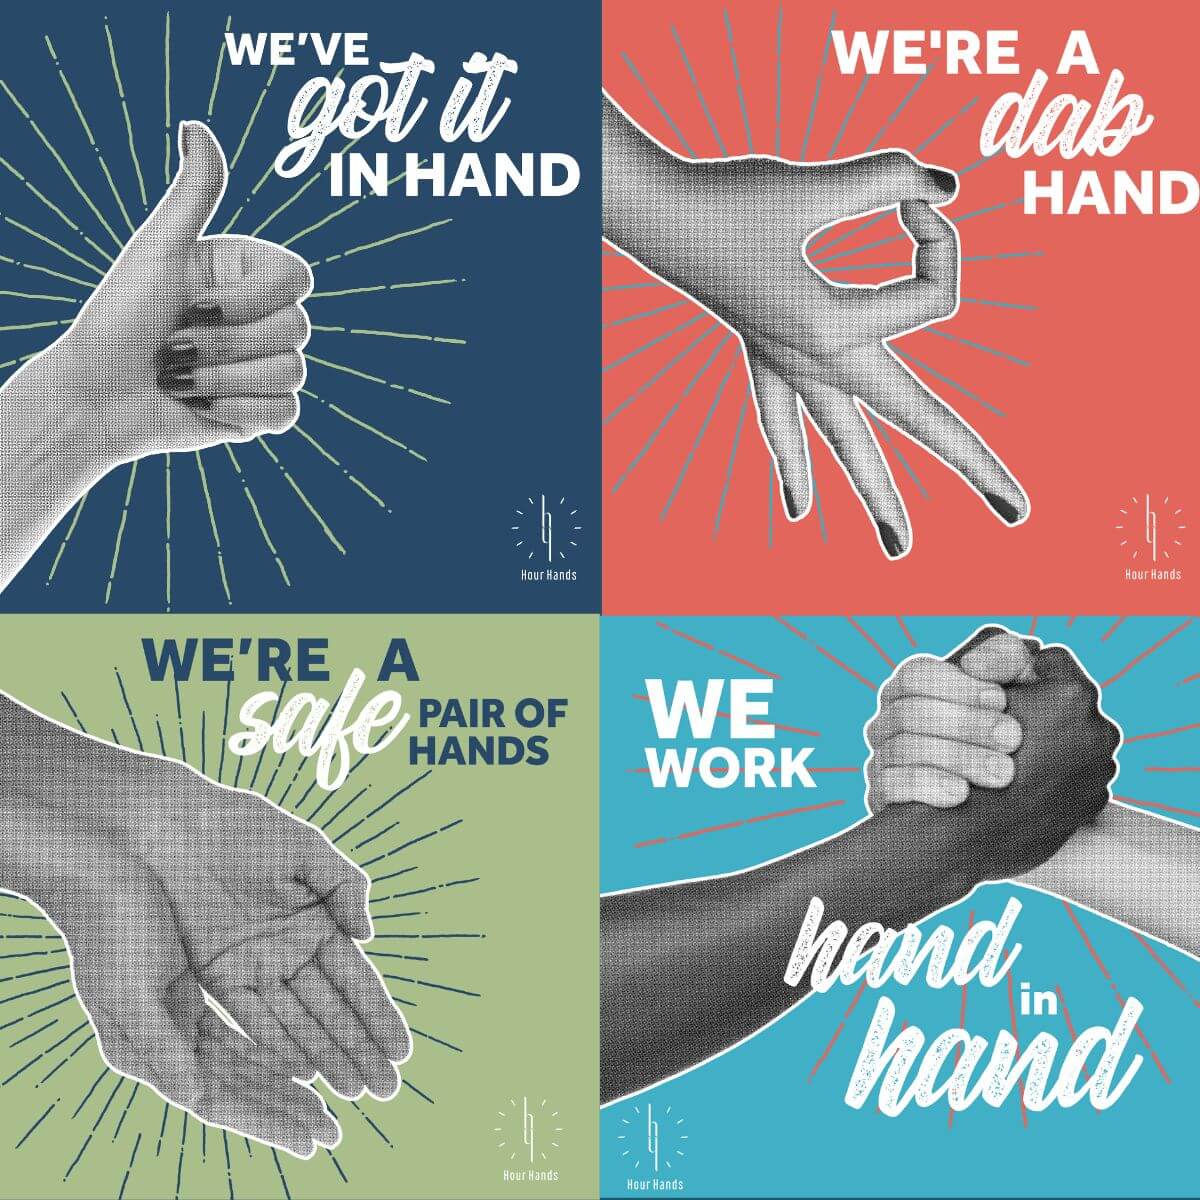 We work hand-in-hand with you